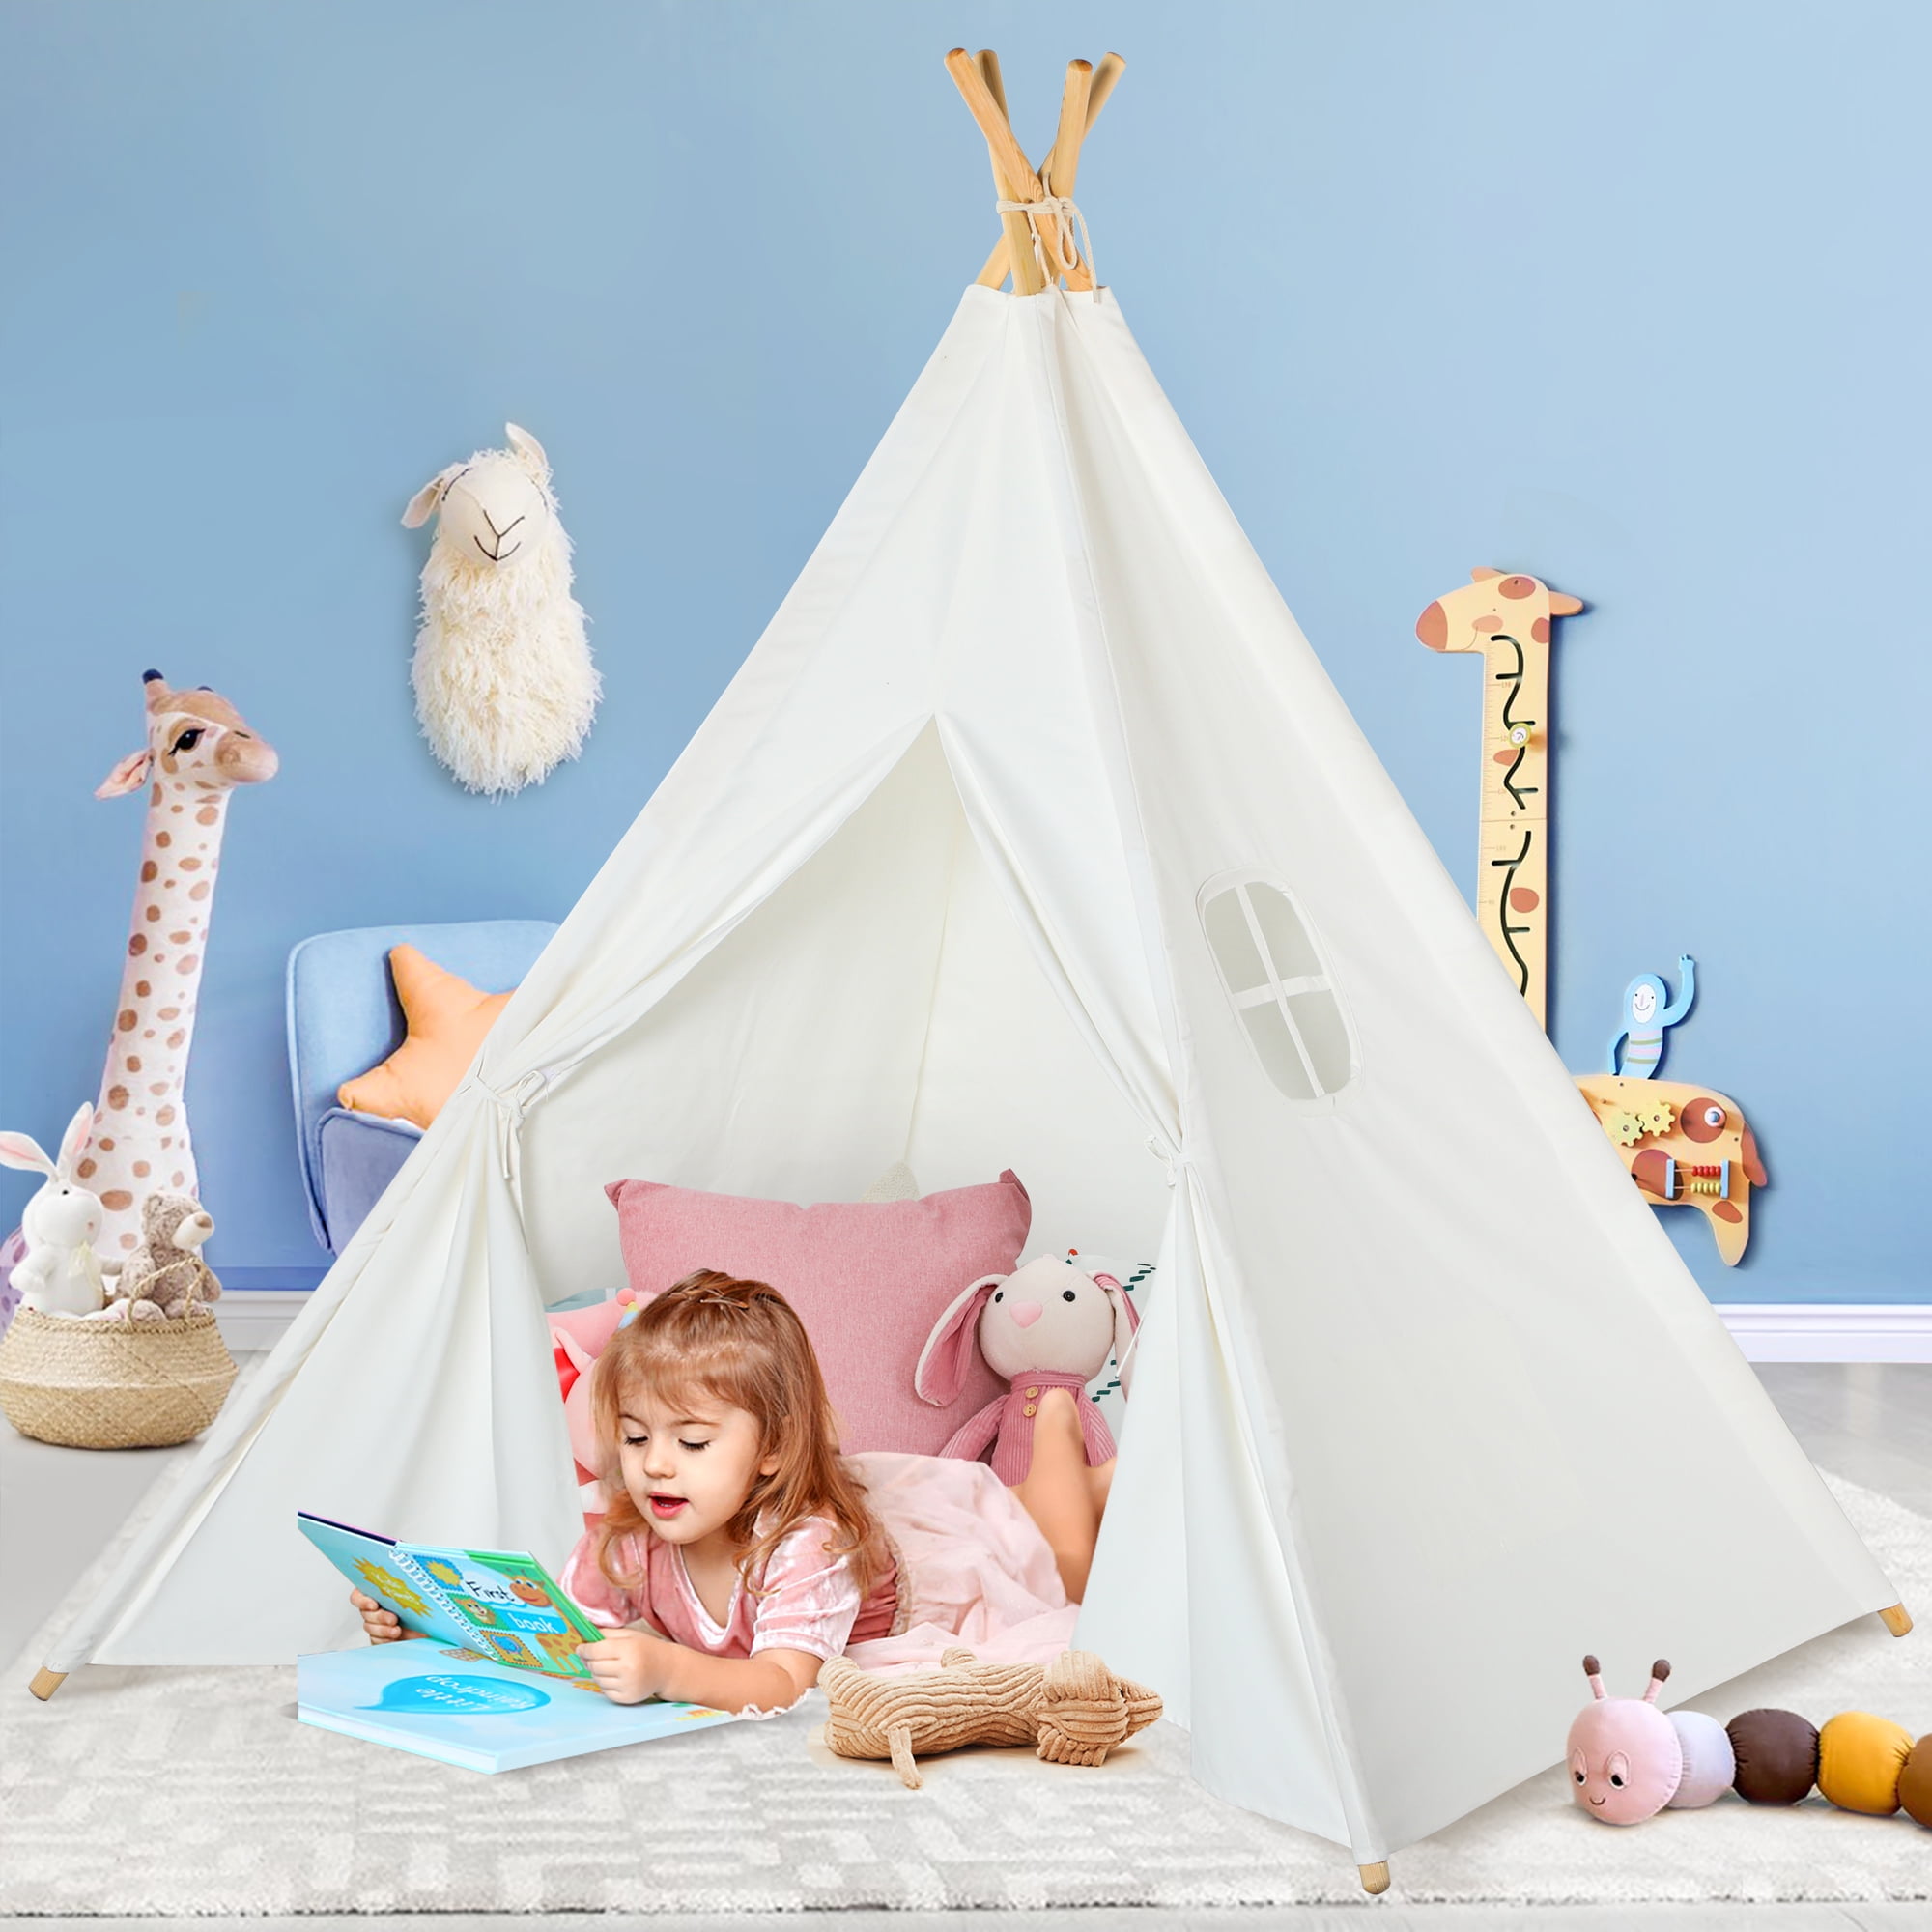 Indian Tent Kids Teepee Childrens Indoor Outdoor Play House Pop Up Playhouse New 